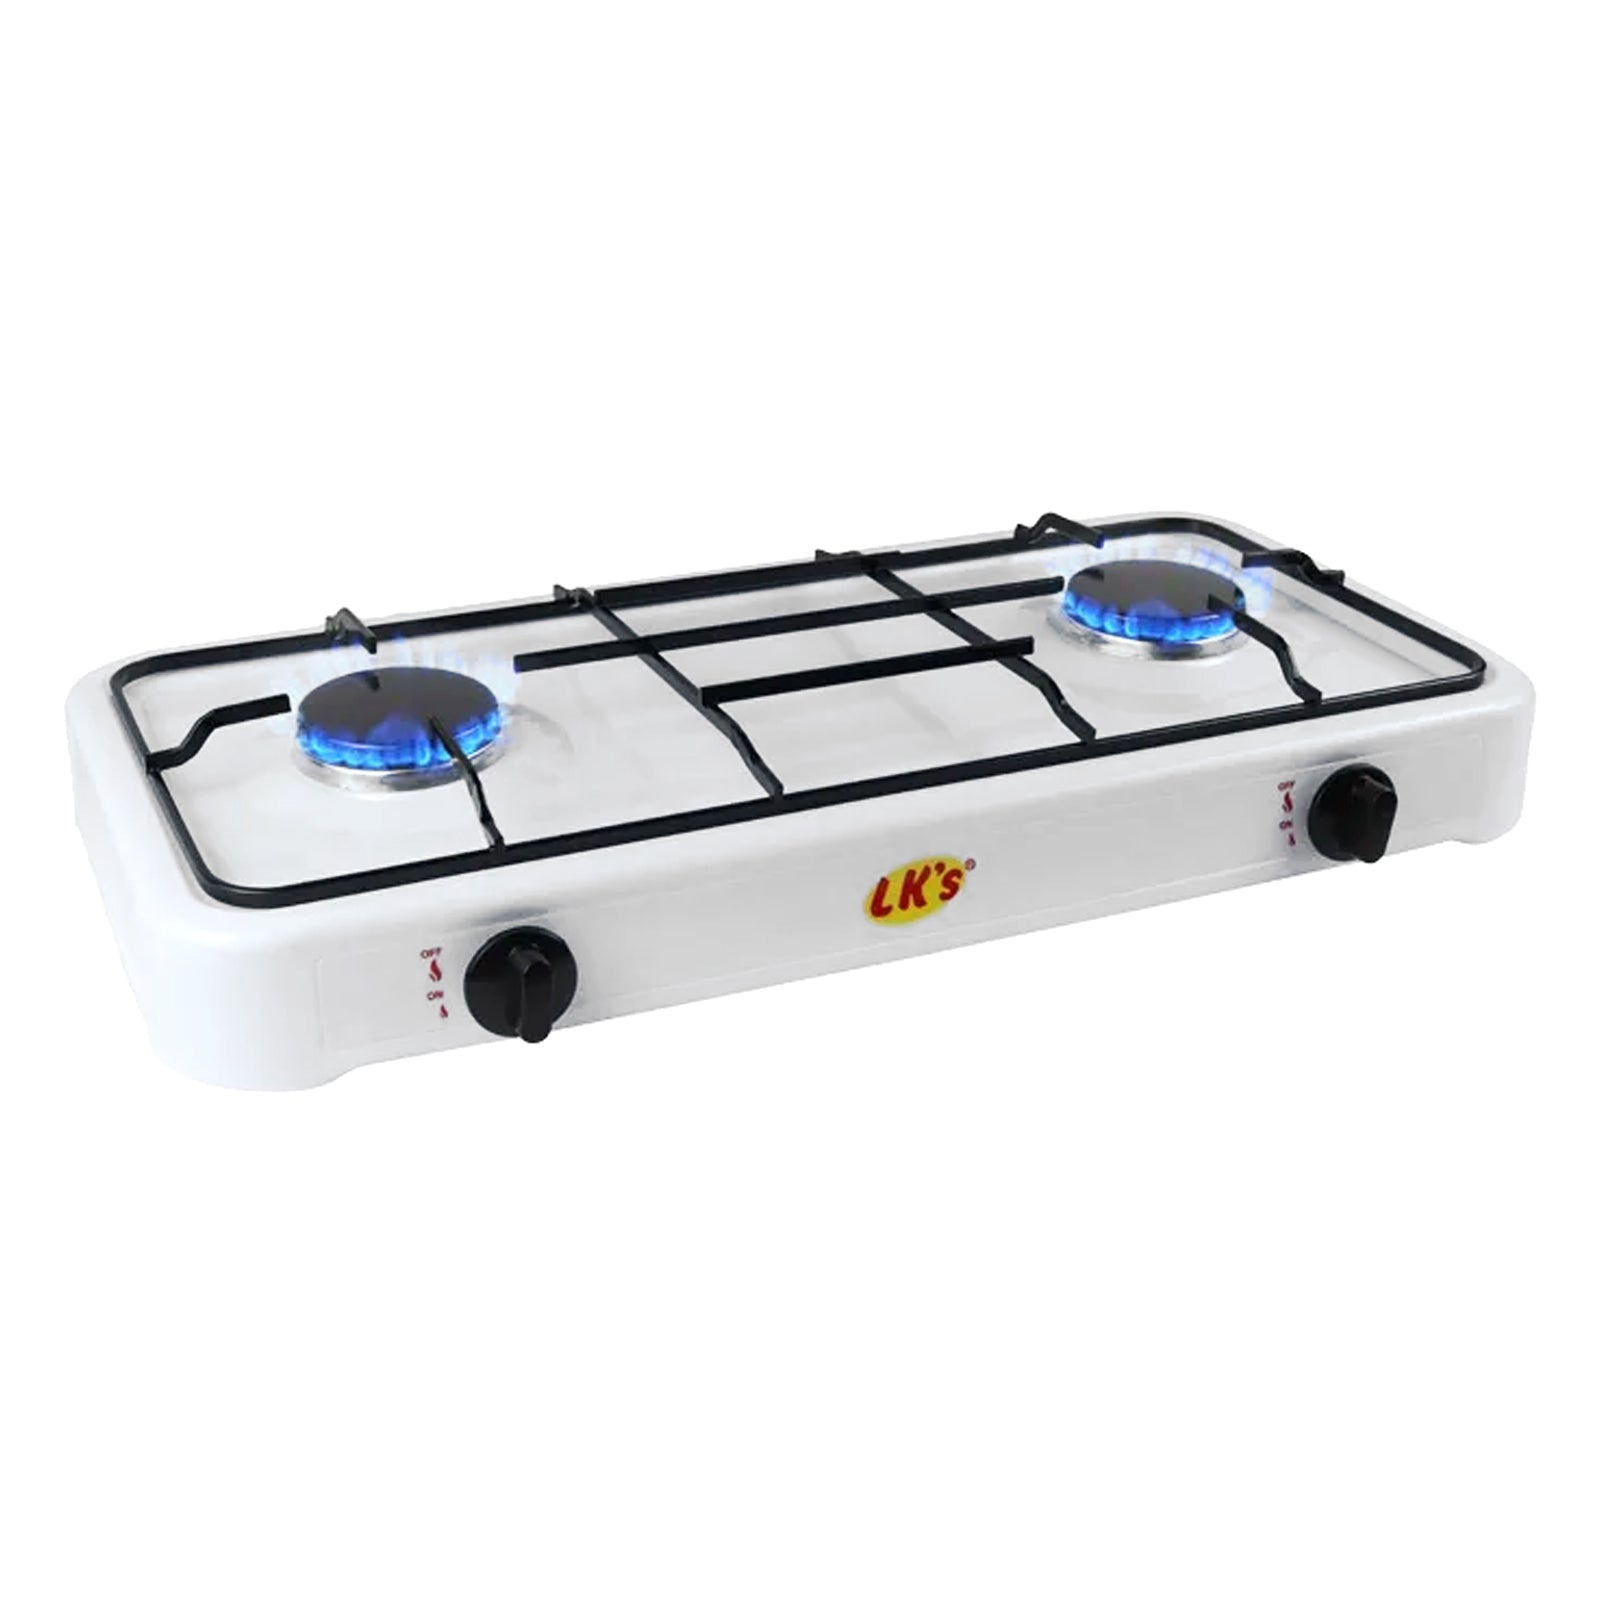 Two Burner Gas Stove Ideal for Camping